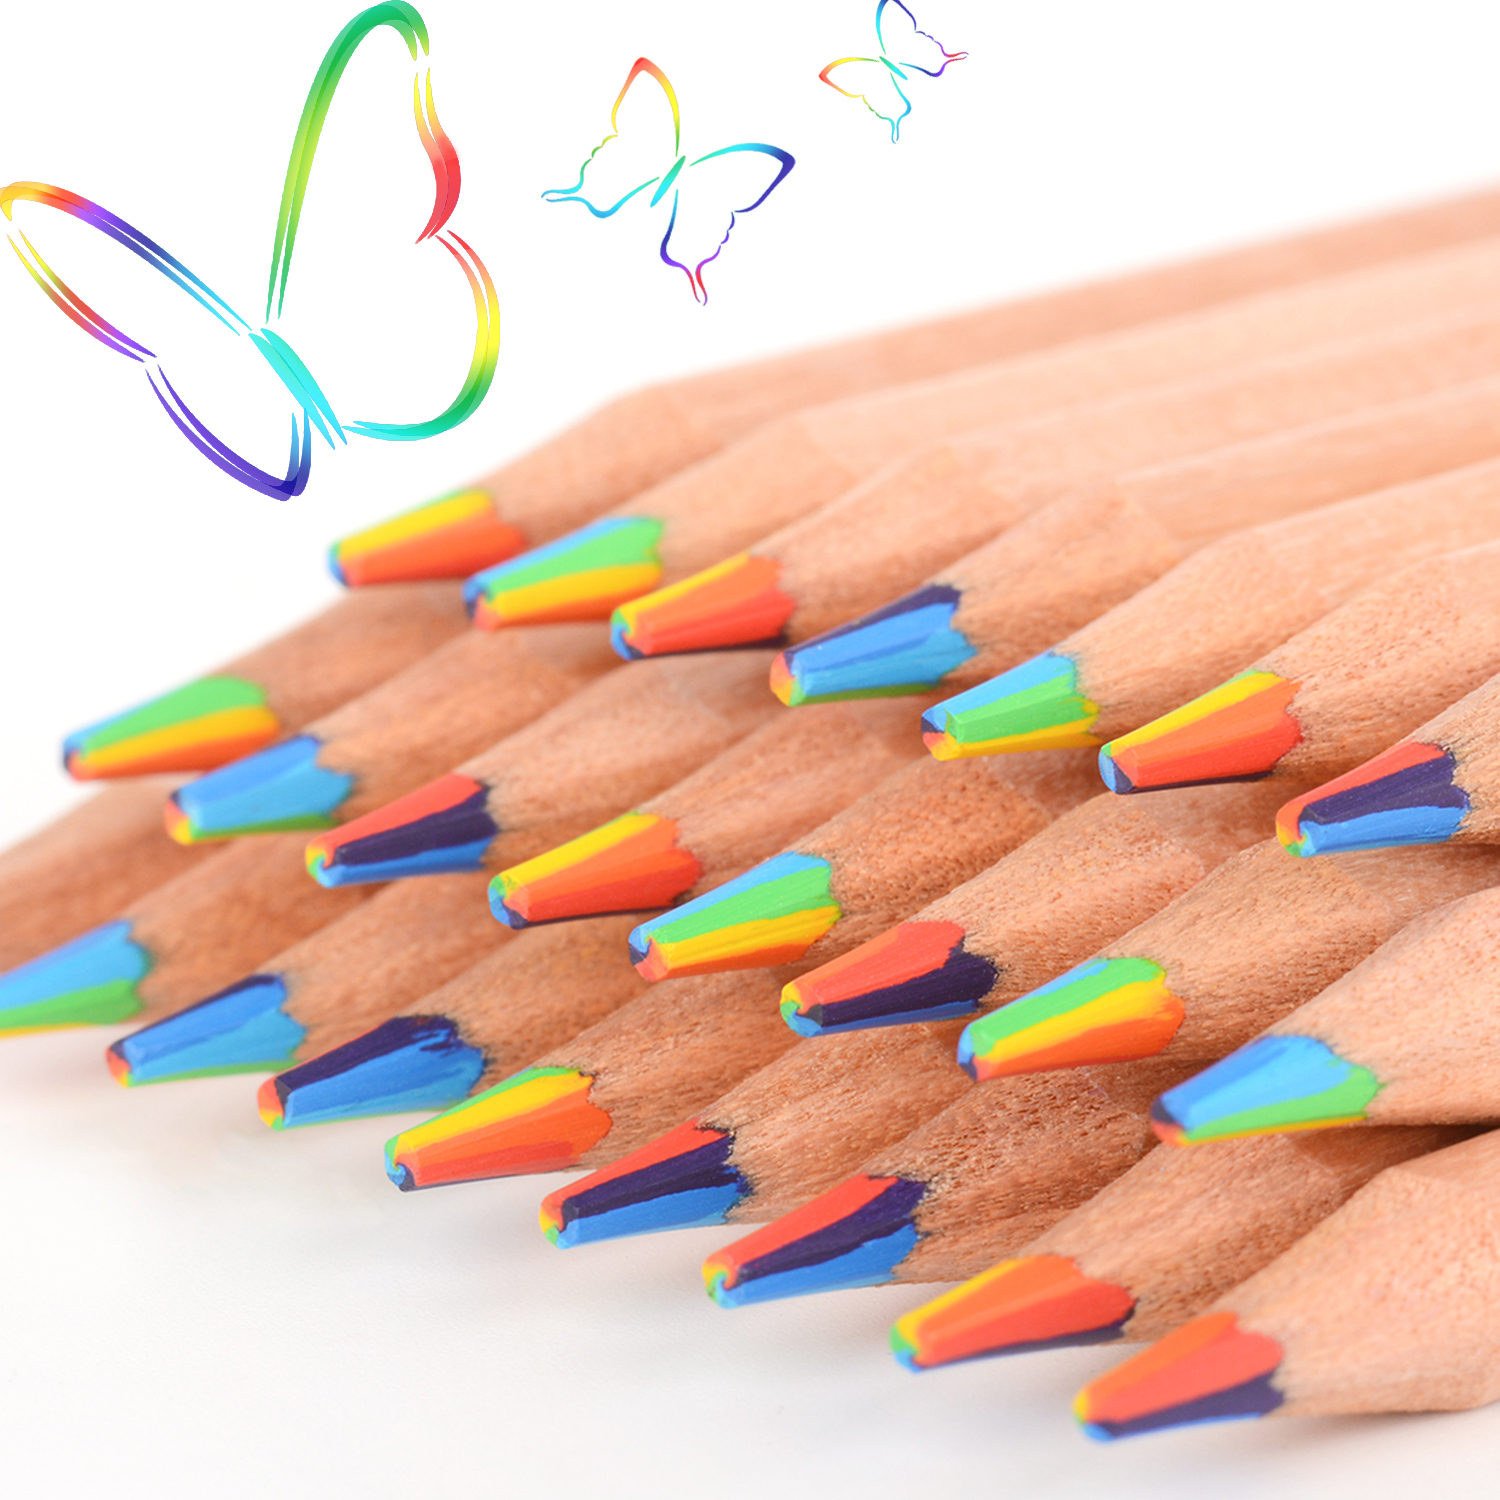 10 Pieces Rainbow Colored Pencils, 7 Color in 1 Pencils for Kids, Assorted Colors for Drawing Coloring Sketching Pencils For Drawing Stationery, Bulk, Pre-sharpened - image 1 of 7